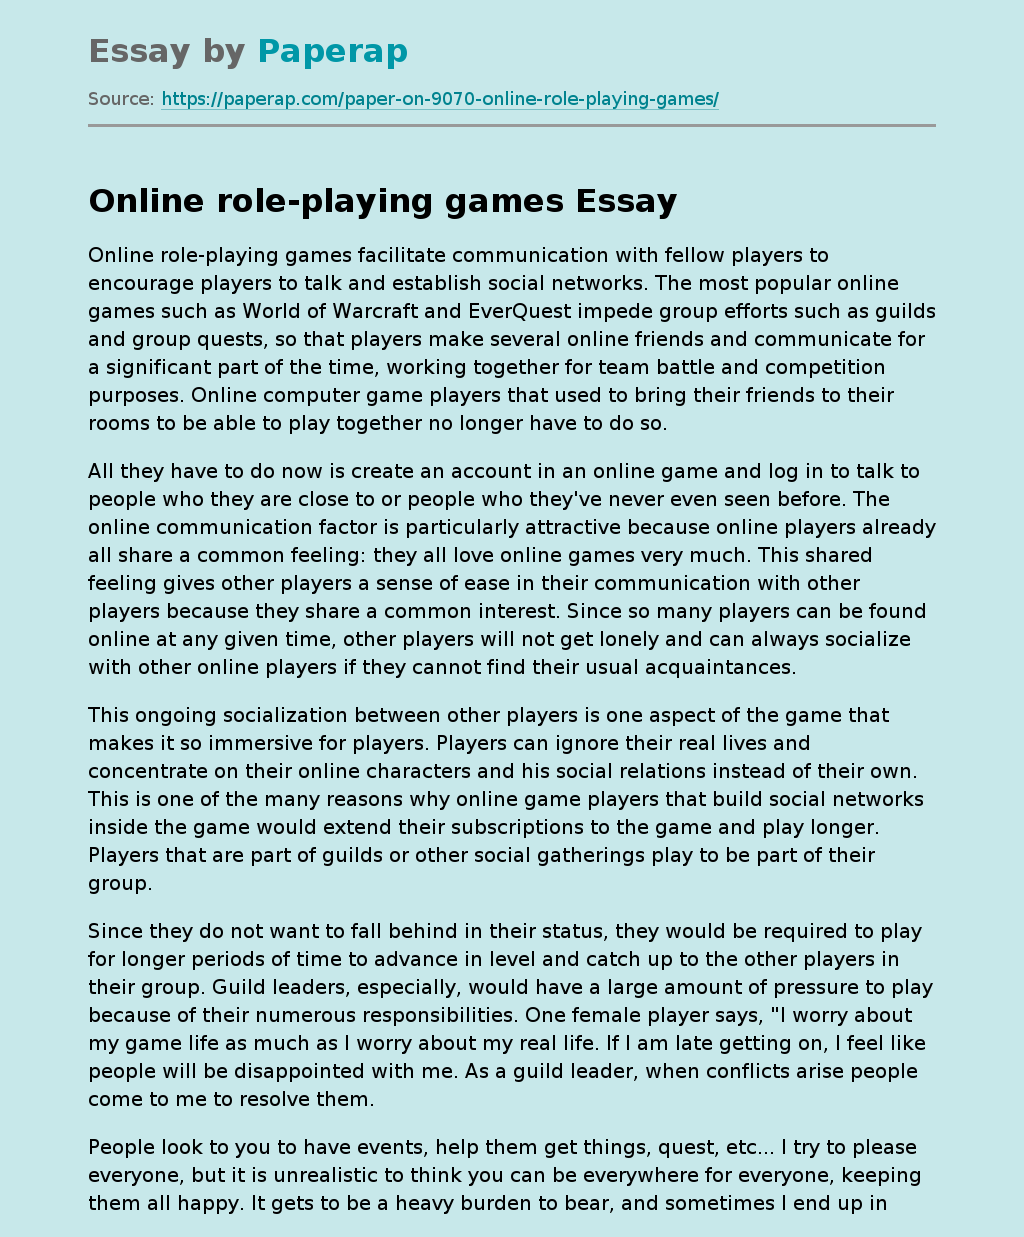 Online role-playing games